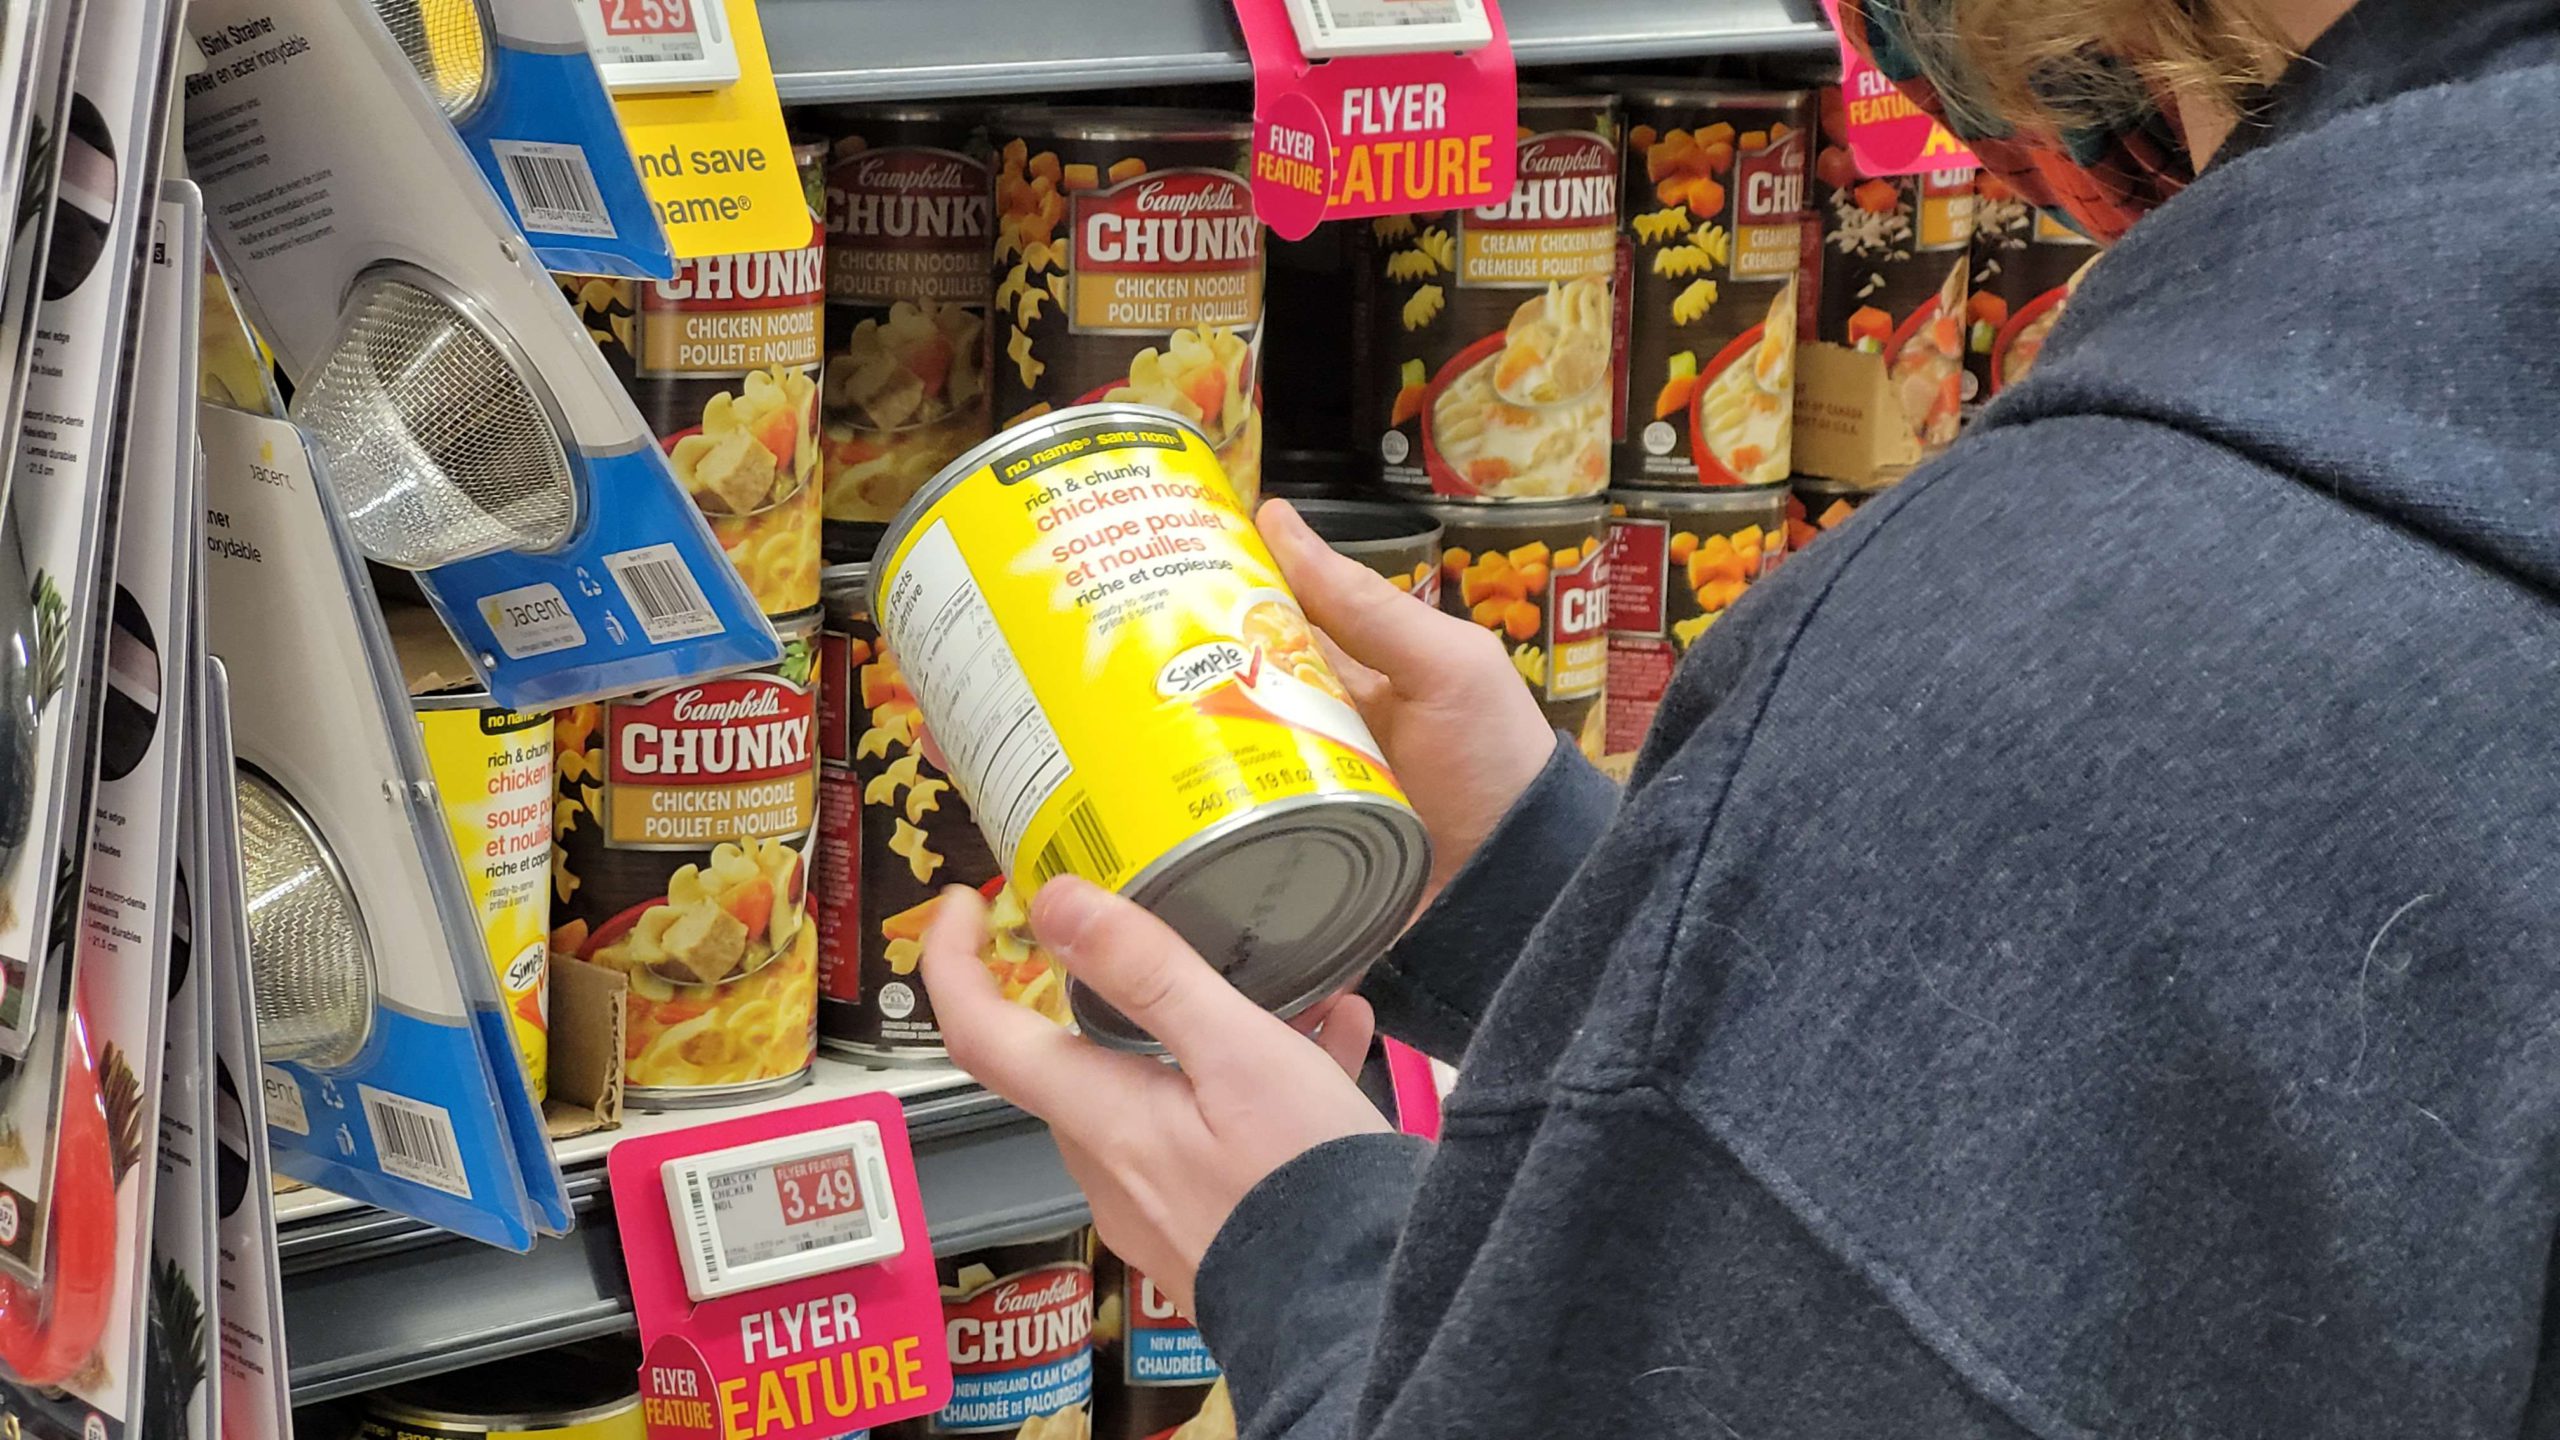 A shopper reaches for a can of soup from the grocery store shelves on a cold February morning.